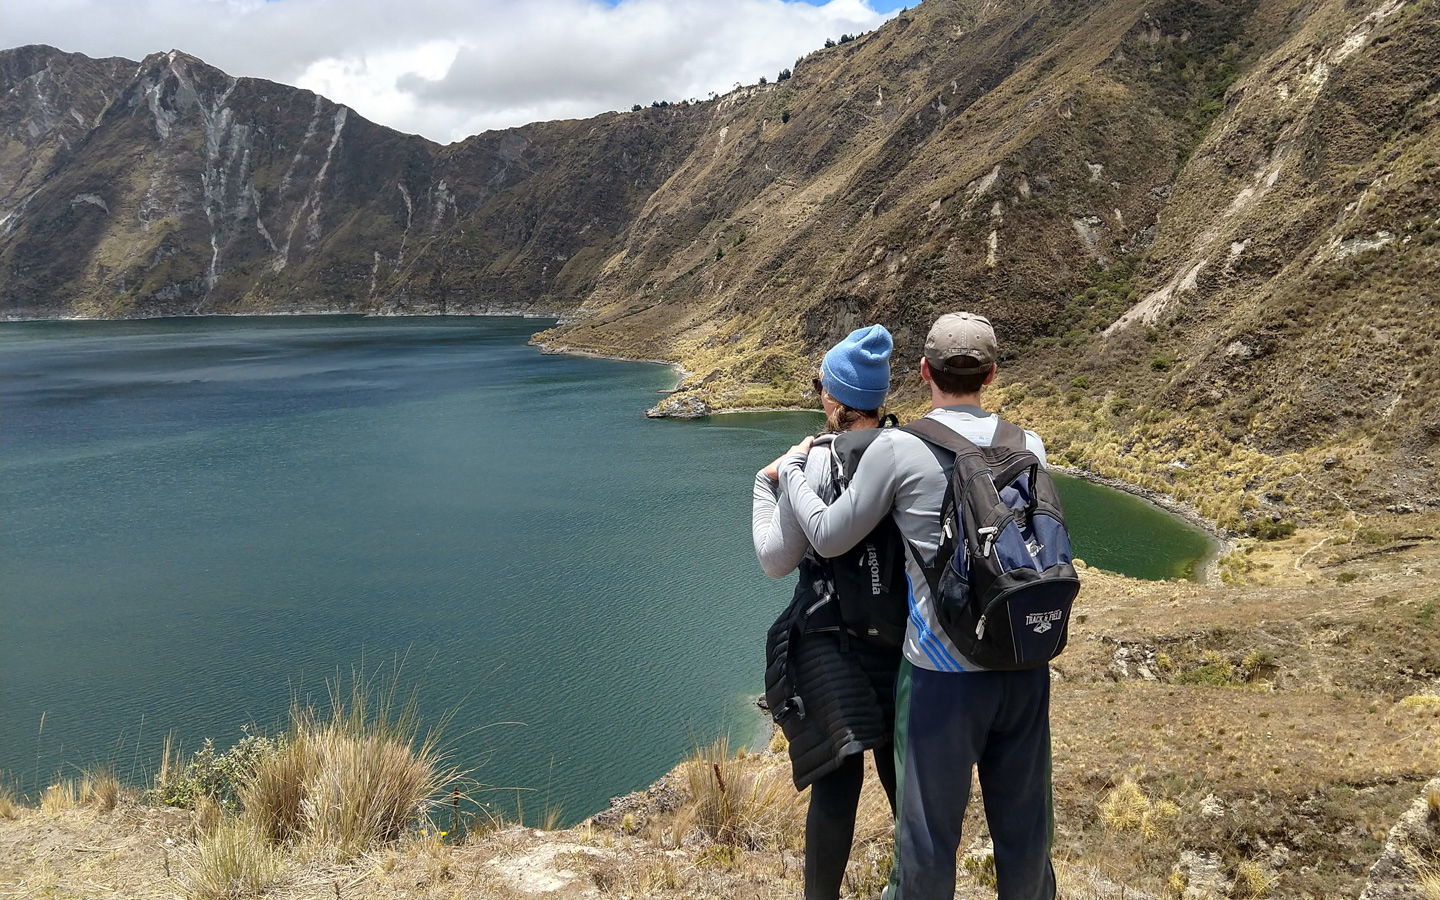 A couple at enjoying the romantic view of Quilotoa